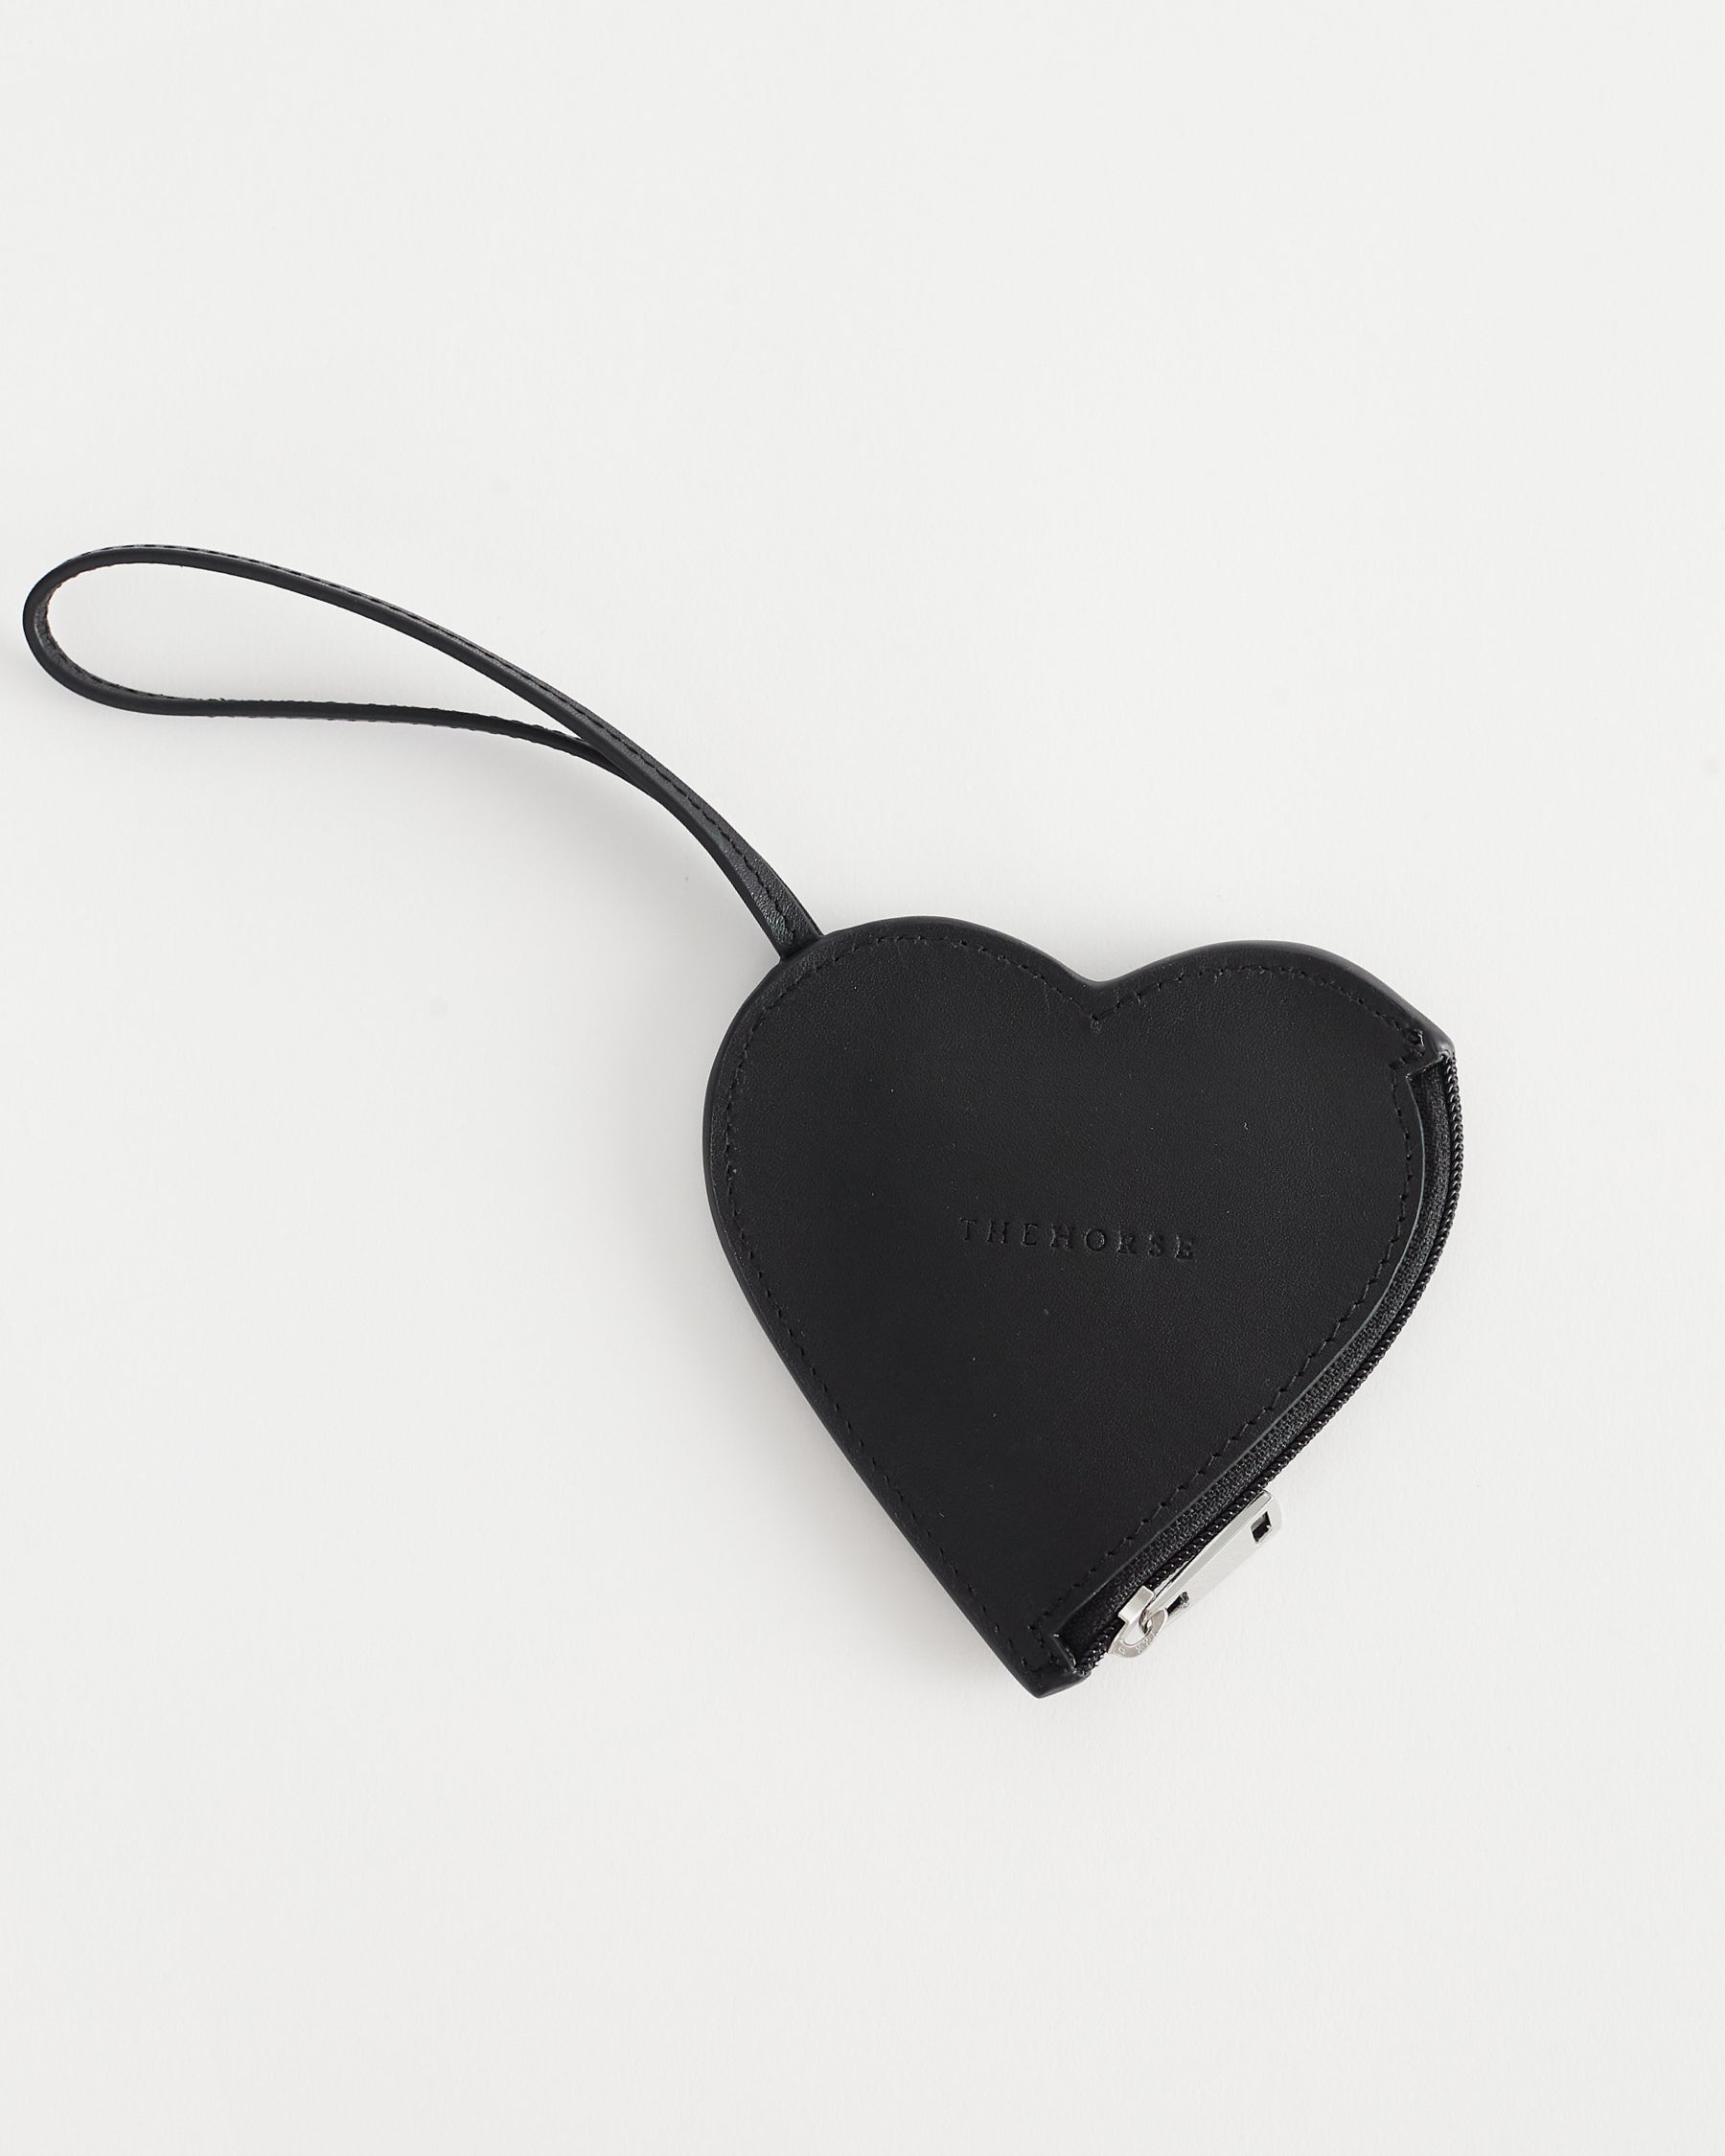 Heart Shaped Leather Coin Pouch in Black by The Horse®